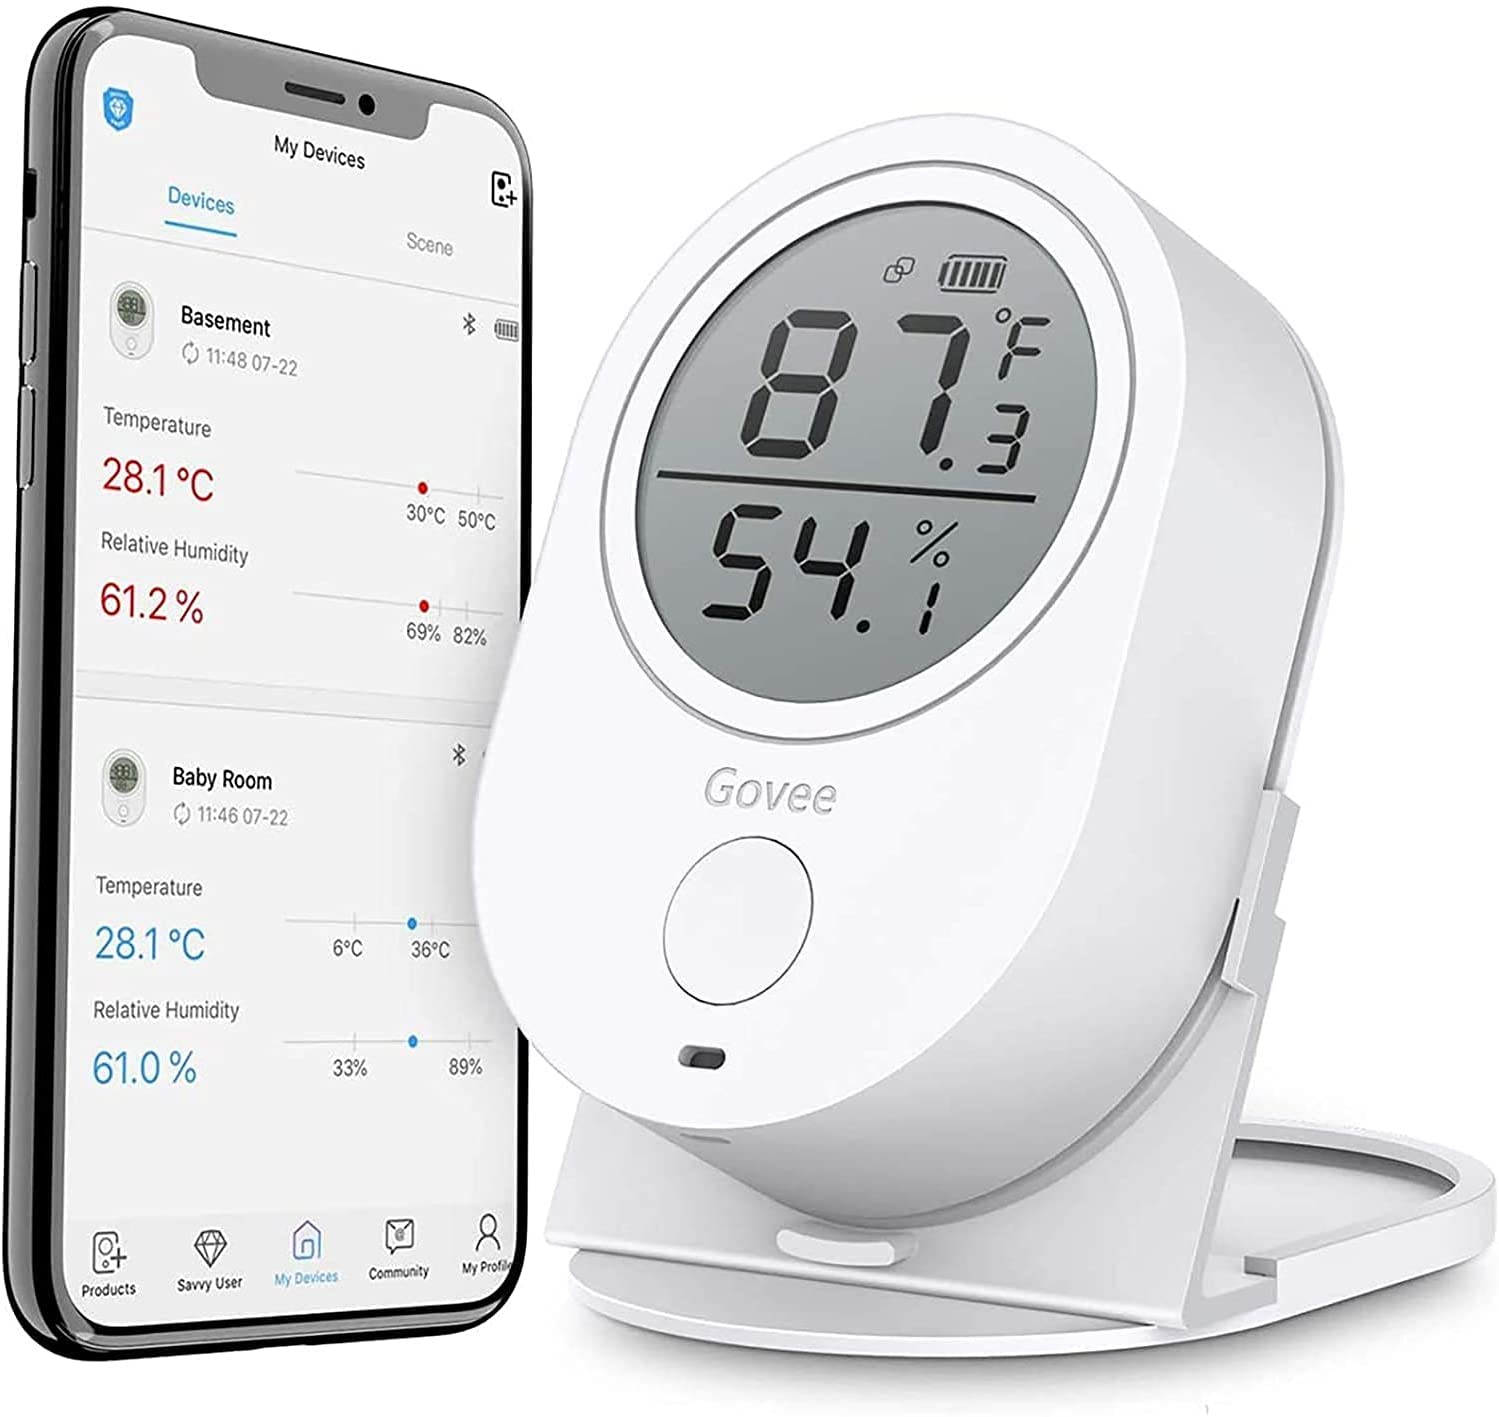 Govee Bluetooth Digital Hygrometer Thermometer, with APP Alert, 2 Year Data Record and Export - $11.99 + Free Shipping